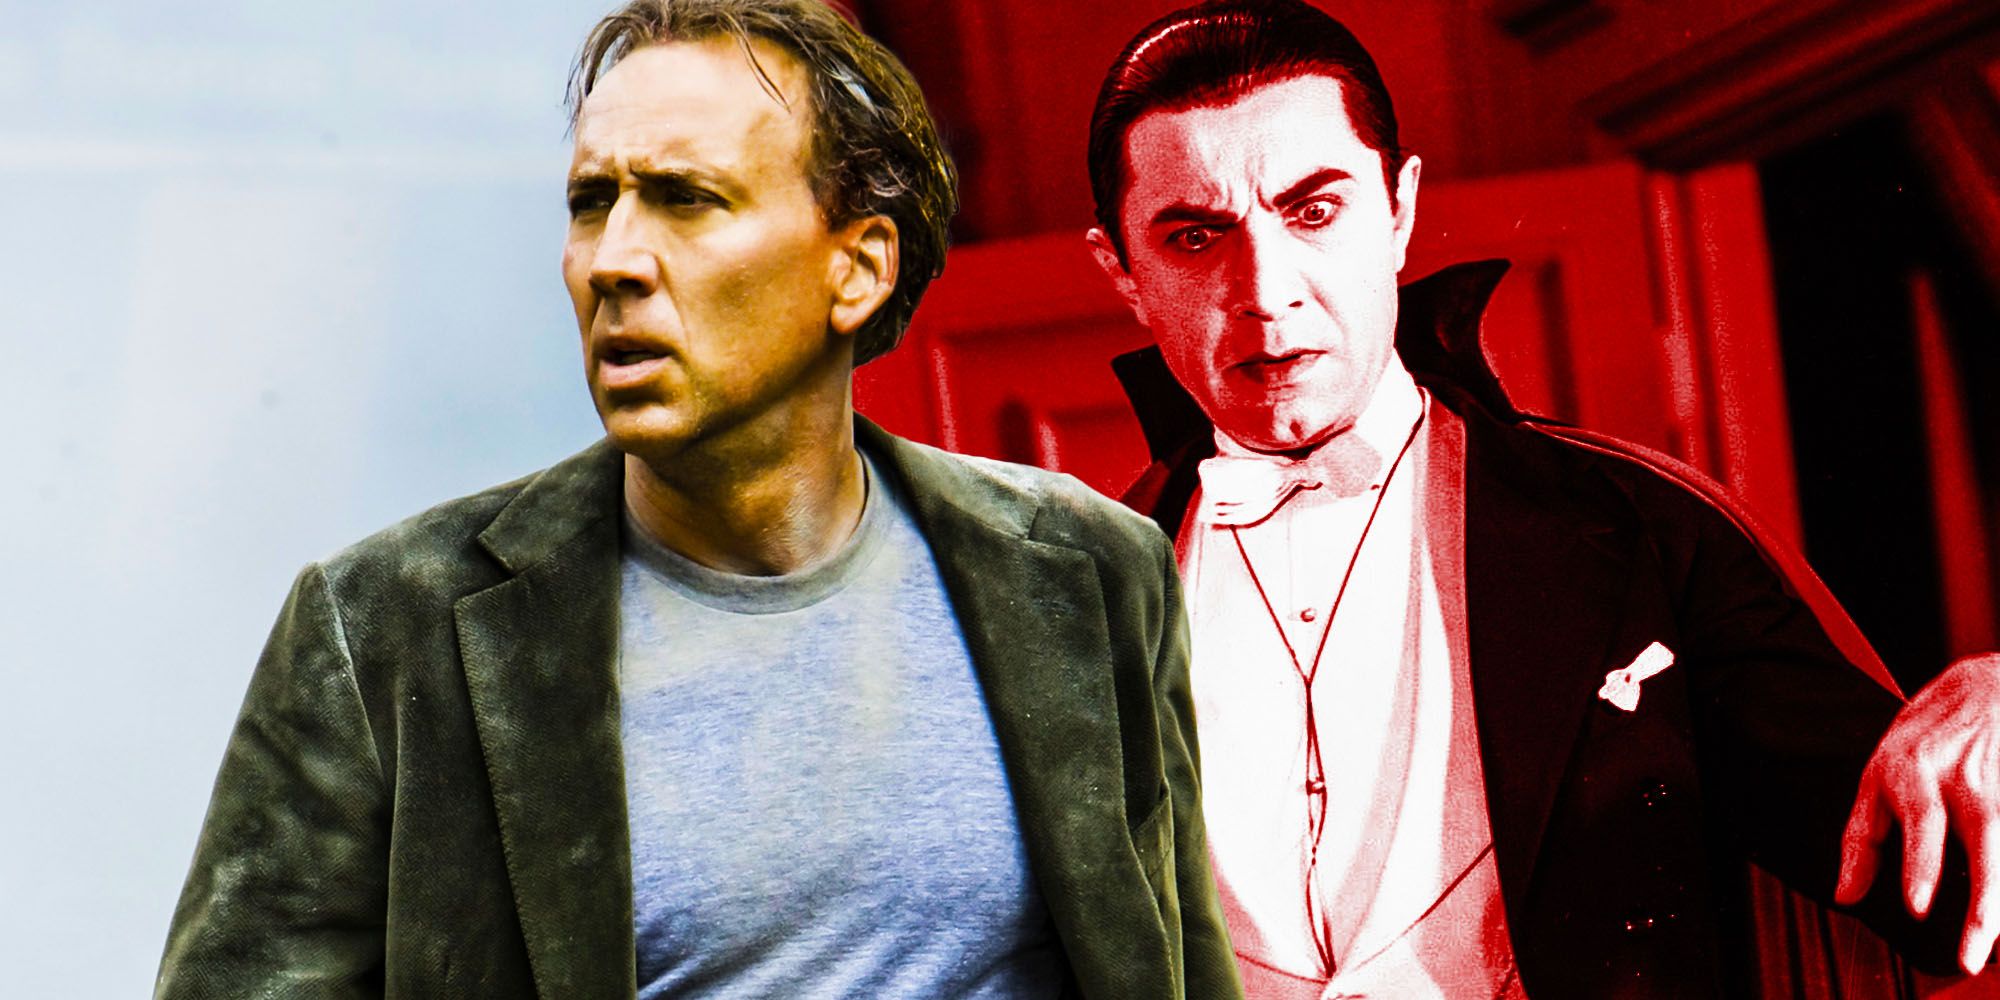 Dracula monster role Nicolas Cage born to play